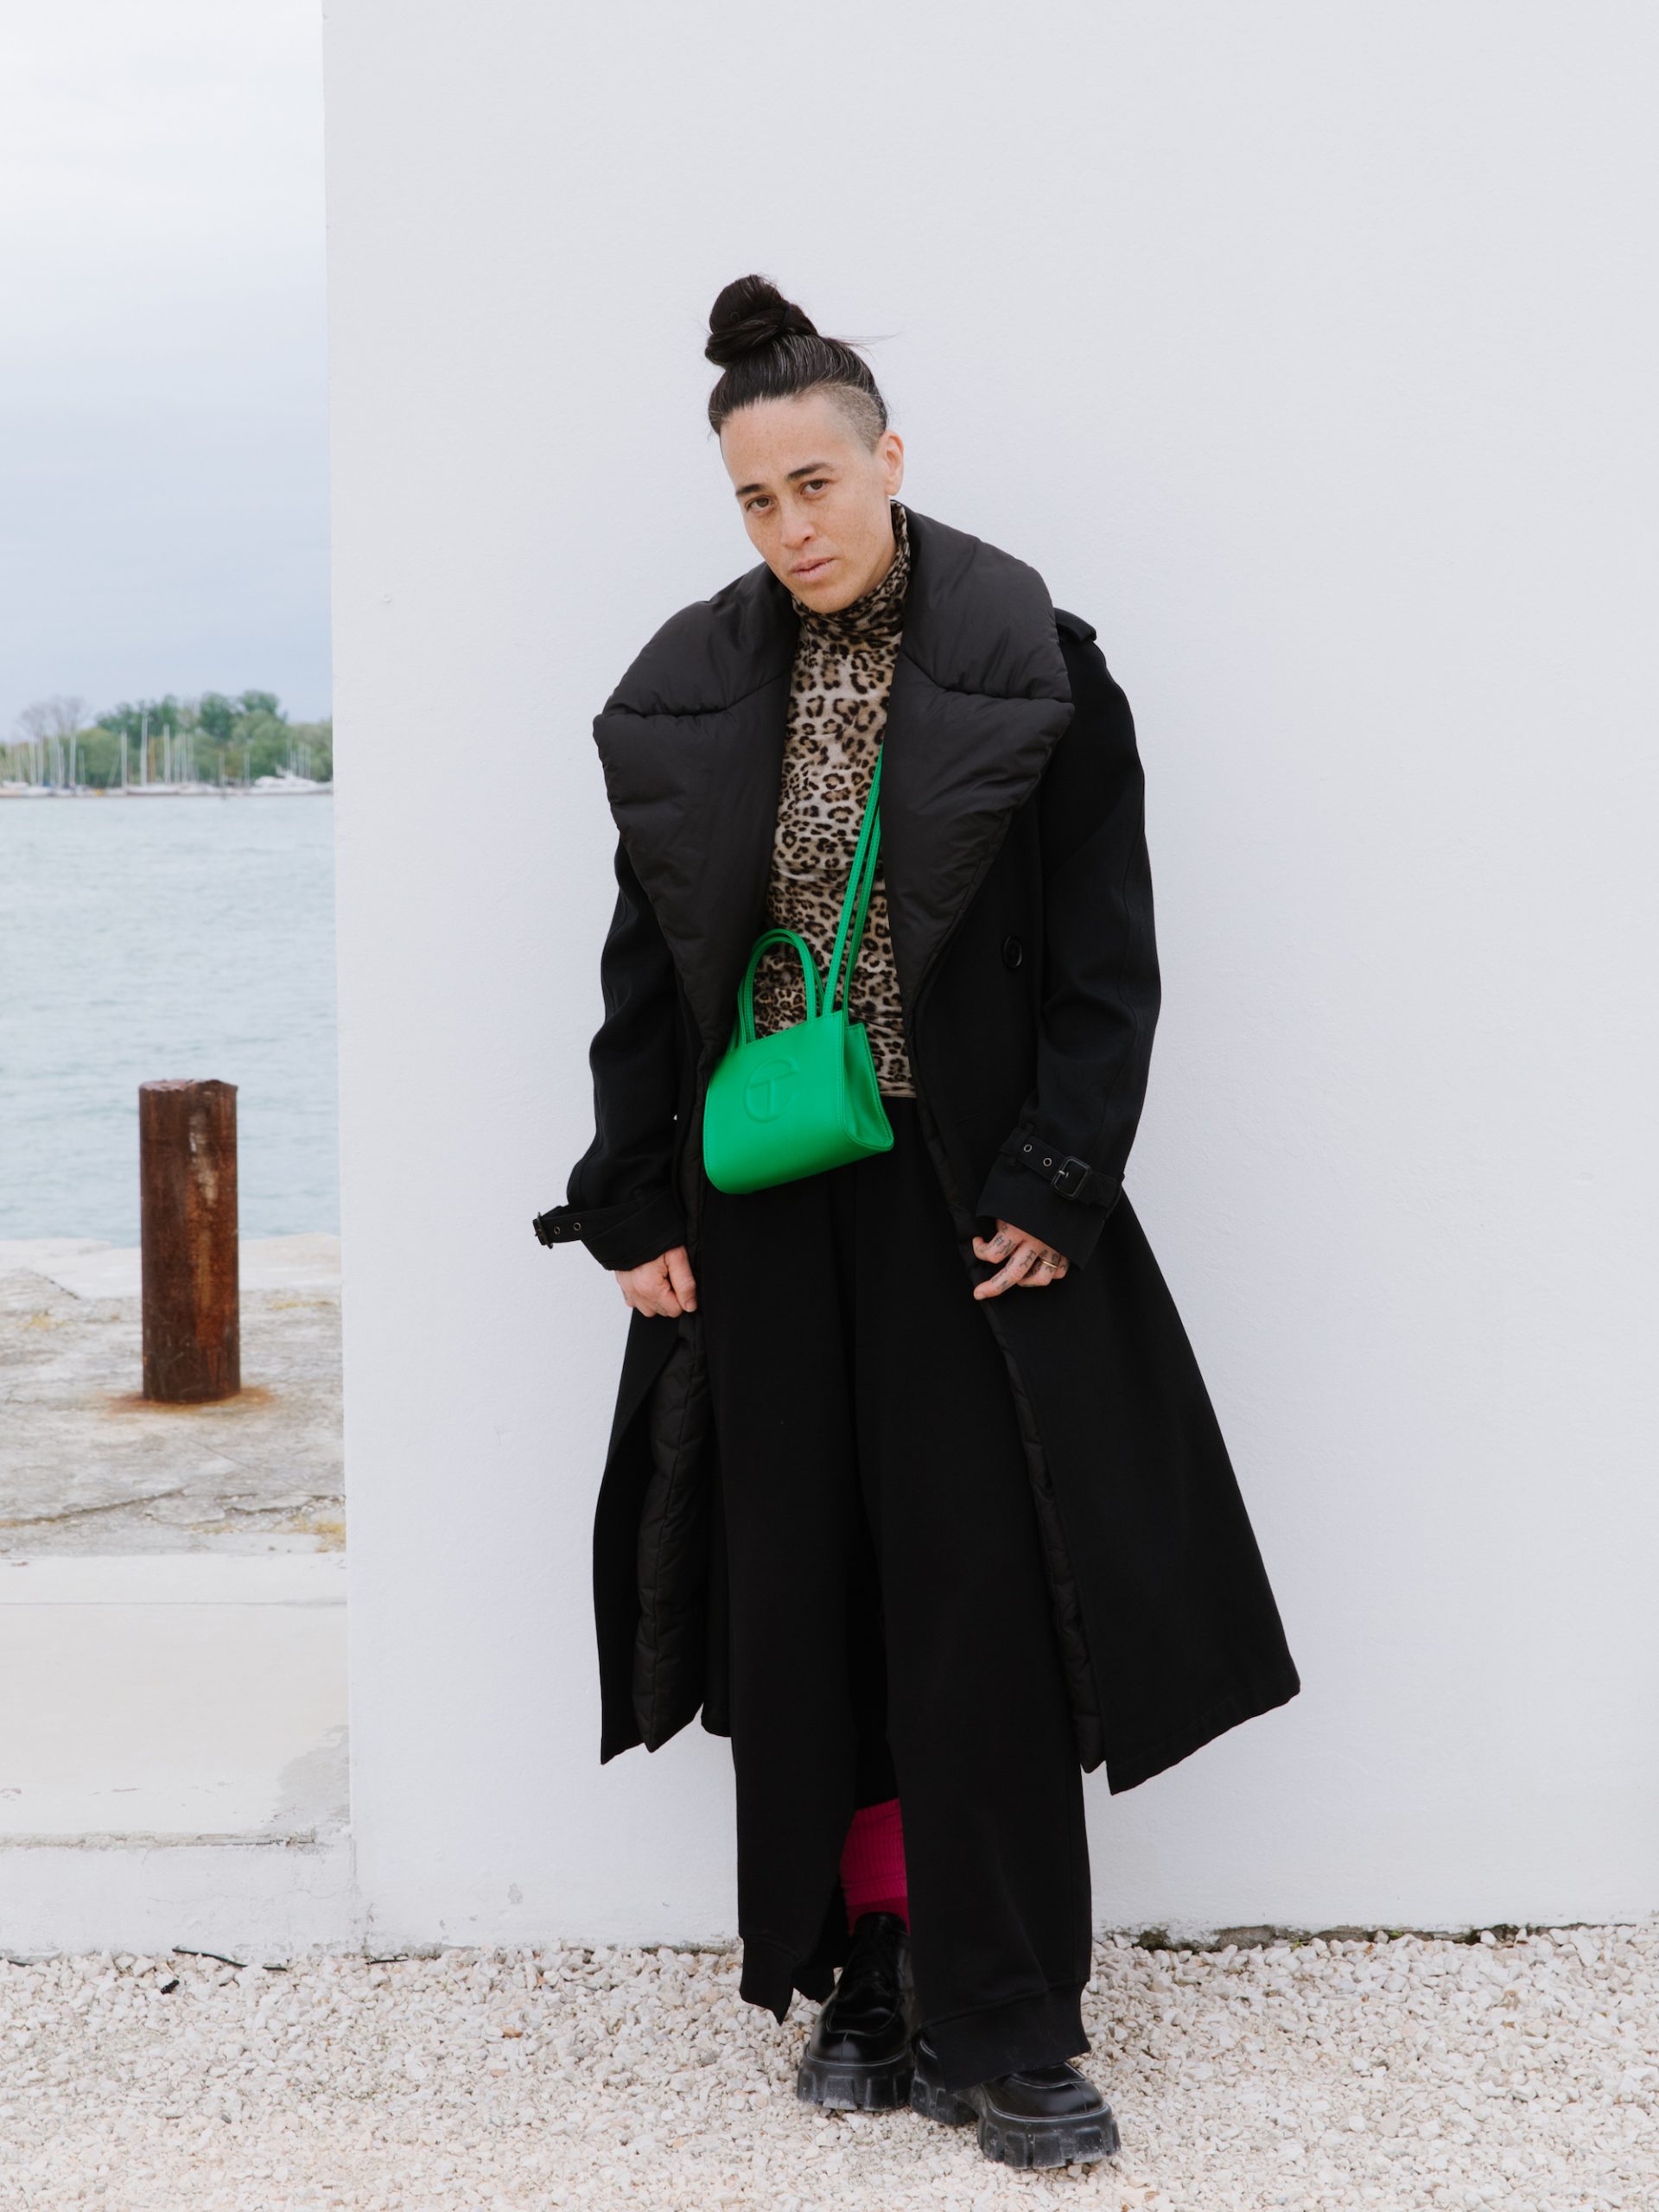 Wu Tsang photographed in Venice by Diana Pfammatter for Elephant